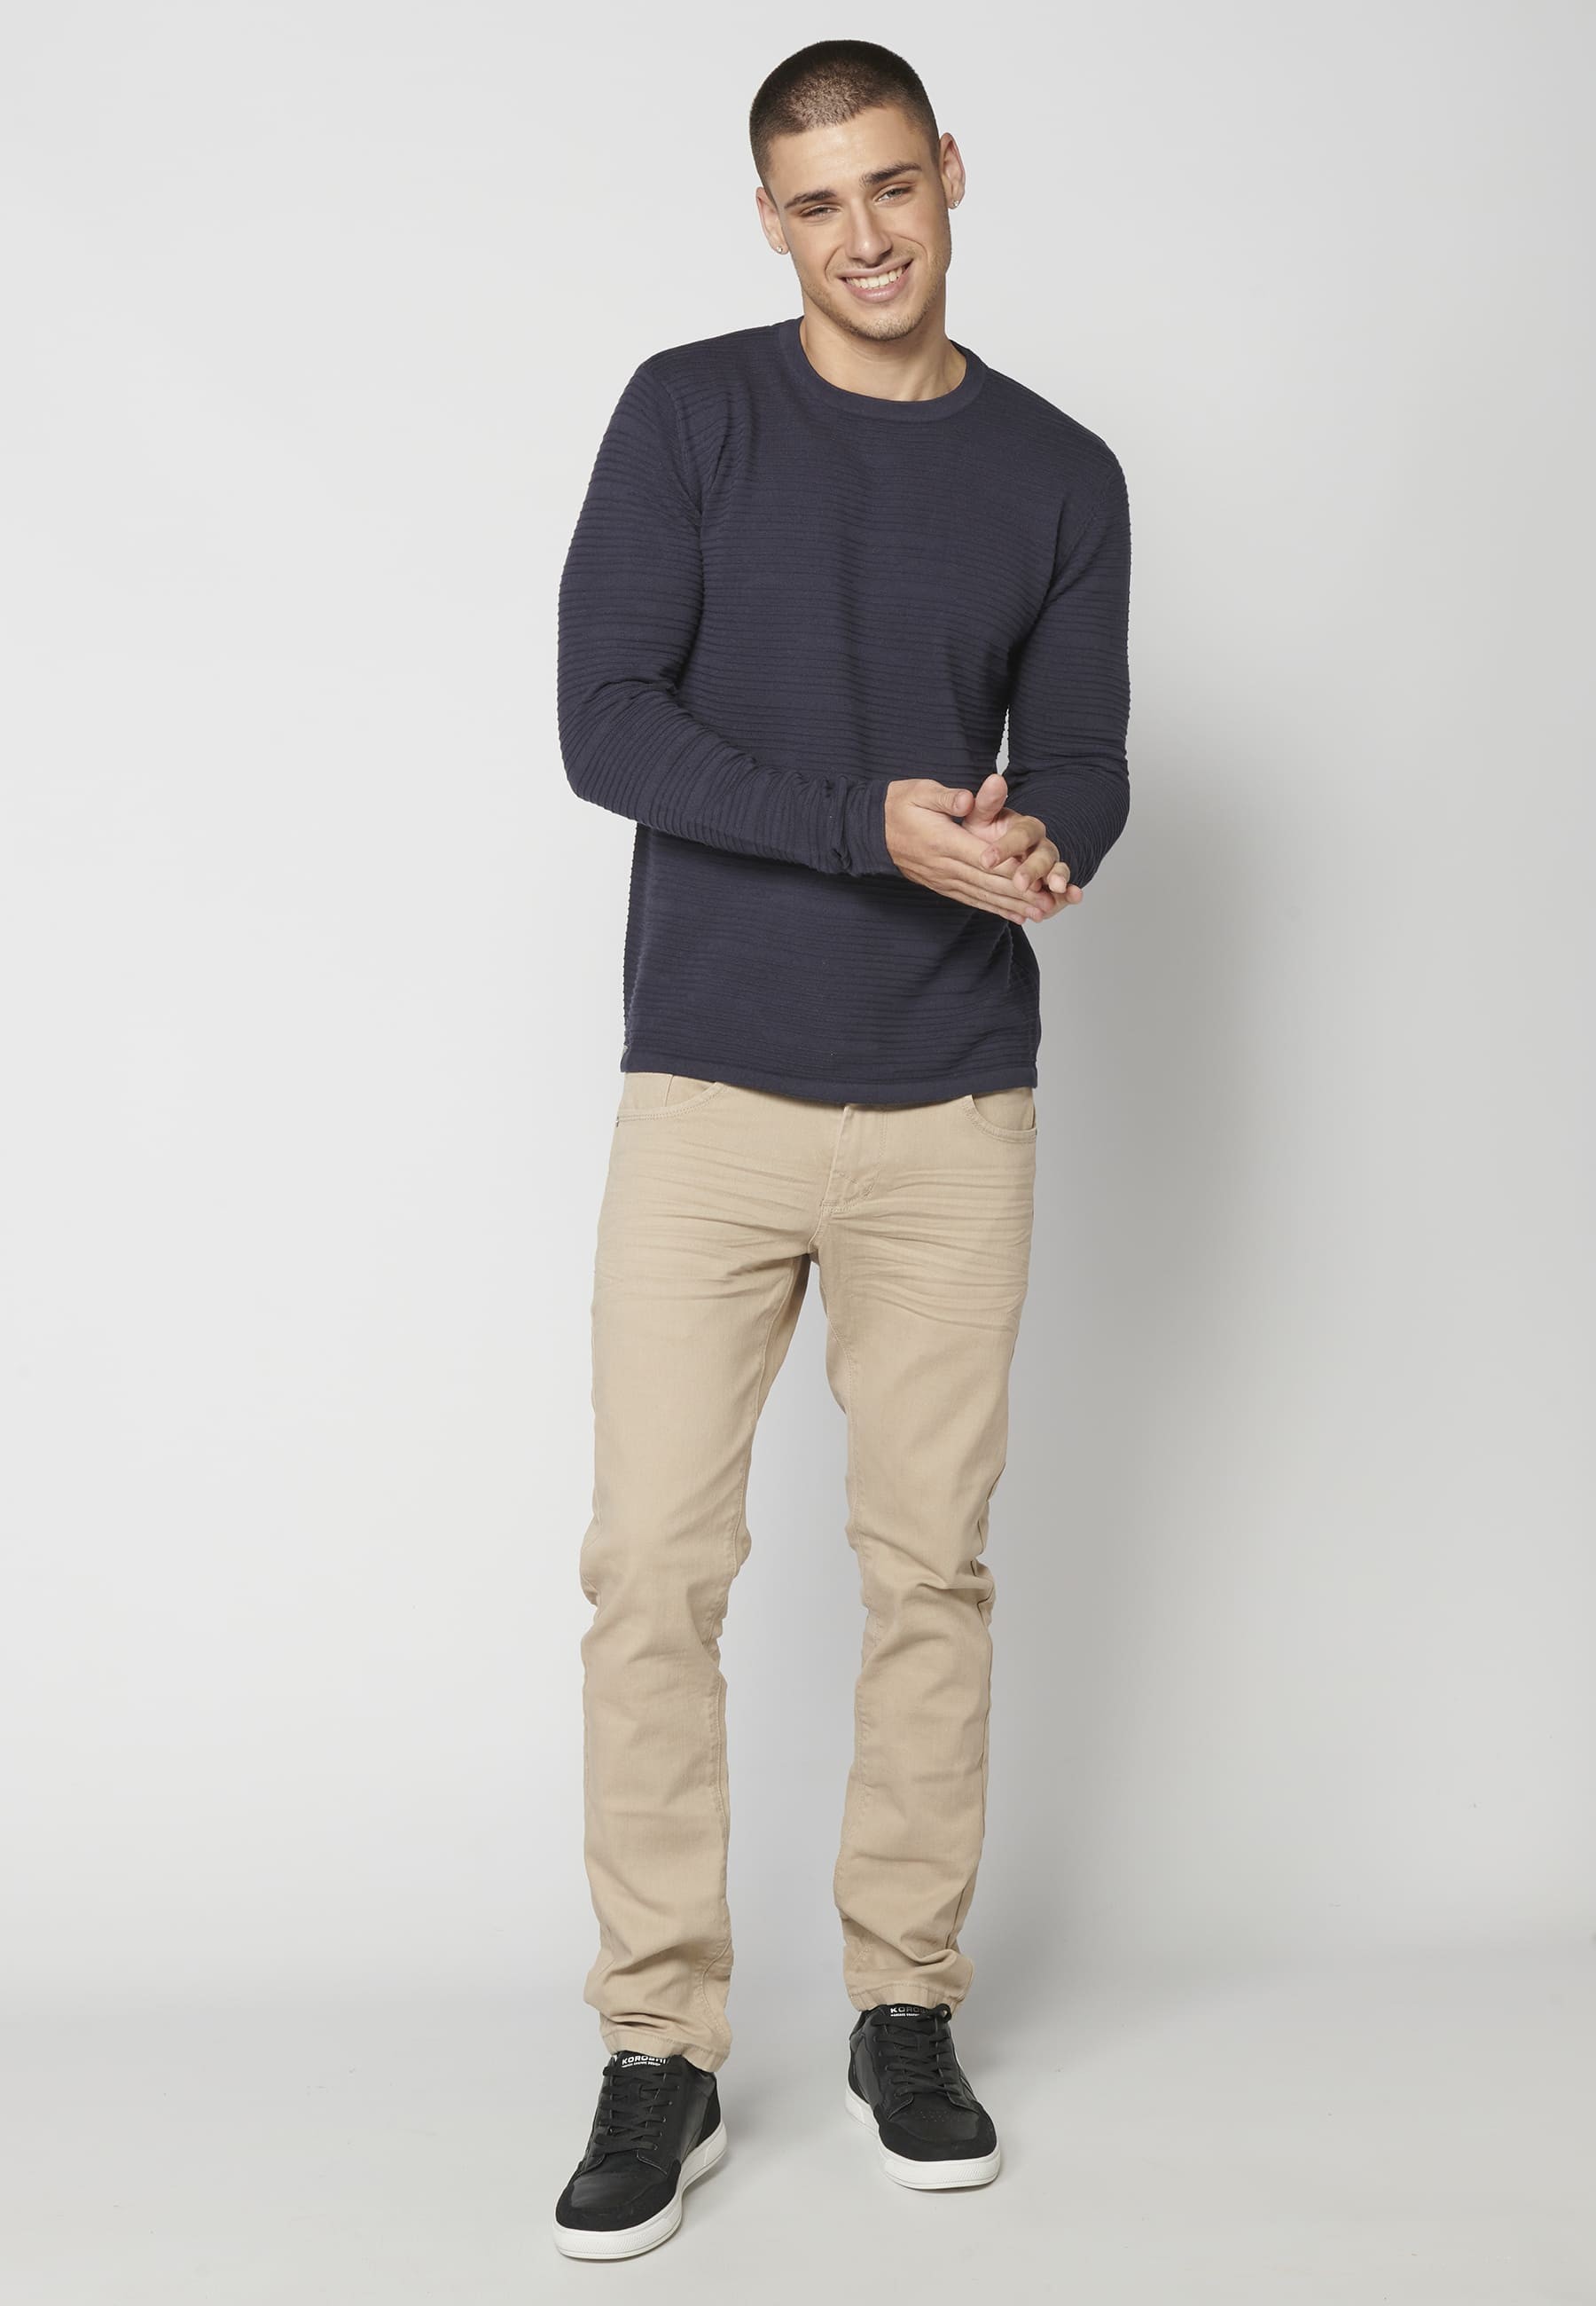 Navy textured knit sweater for Men